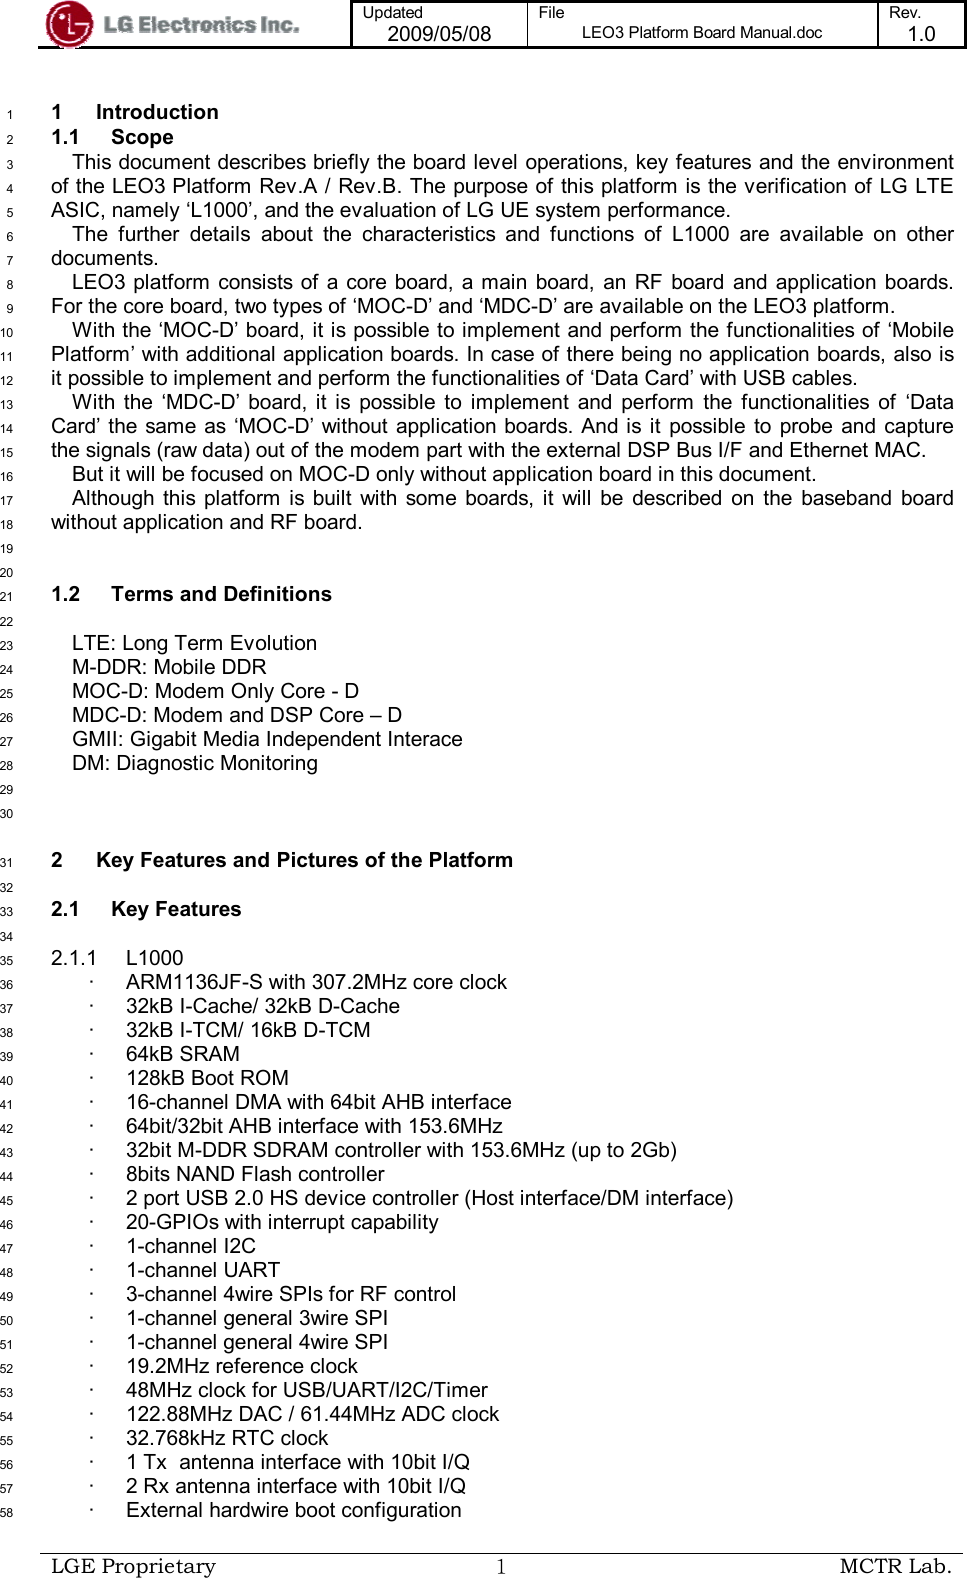  Updated 2009/05/08 File LEO3 Platform Board Manual.doc Rev. 1.0   LGE Proprietary  １ MCTR Lab.  1  Introduction 1 1.1  Scope 2 This document describes briefly the board level operations, key features and the environment 3 of the LEO3 Platform Rev.A / Rev.B. The purpose of this platform is the verification of LG LTE 4 ASIC, namely ‘L1000’, and the evaluation of LG UE system performance.  5 The  further  details  about  the  characteristics  and  functions  of  L1000  are  available  on  other 6 documents. 7 LEO3 platform consists of a core board, a main board,  an RF  board  and application boards. 8 For the core board, two types of ‘MOC-D’ and ‘MDC-D’ are available on the LEO3 platform.  9 With the ‘MOC-D’ board, it is possible to implement and perform the functionalities of ‘Mobile 10 Platform’ with additional application boards. In case of there being no application boards, also is 11 it possible to implement and perform the functionalities of ‘Data Card’ with USB cables.  12 With  the  ‘MDC-D’ board,  it  is  possible  to  implement  and  perform  the  functionalities  of  ‘Data 13 Card’  the same as  ‘MOC-D’ without application boards.  And is  it  possible  to  probe  and  capture 14 the signals (raw data) out of the modem part with the external DSP Bus I/F and Ethernet MAC.  15 But it will be focused on MOC-D only without application board in this document. 16 Although this  platform  is built  with some  boards, it  will  be  described  on  the  baseband  board 17 without application and RF board. 18  19  20 1.2  Terms and Definitions 21  22 LTE: Long Term Evolution 23 M-DDR: Mobile DDR 24 MOC-D: Modem Only Core - D 25 MDC-D: Modem and DSP Core – D 26 GMII: Gigabit Media Independent Interace 27 DM: Diagnostic Monitoring 28  29  30 2  Key Features and Pictures of the Platform 31  32 2.1  Key Features 33  34 2.1.1  L1000 35 ·  ARM1136JF-S with 307.2MHz core clock 36 ·  32kB I-Cache/ 32kB D-Cache 37 ·  32kB I-TCM/ 16kB D-TCM 38 ·  64kB SRAM 39 ·  128kB Boot ROM 40 ·  16-channel DMA with 64bit AHB interface 41 ·  64bit/32bit AHB interface with 153.6MHz 42 ·  32bit M-DDR SDRAM controller with 153.6MHz (up to 2Gb) 43 ·  8bits NAND Flash controller  44 ·  2 port USB 2.0 HS device controller (Host interface/DM interface) 45 ·  20-GPIOs with interrupt capability 46 ·  1-channel I2C 47 ·  1-channel UART 48 ·  3-channel 4wire SPIs for RF control 49 ·  1-channel general 3wire SPI  50 ·  1-channel general 4wire SPI 51 ·  19.2MHz reference clock 52 ·  48MHz clock for USB/UART/I2C/Timer 53 ·  122.88MHz DAC / 61.44MHz ADC clock 54 ·  32.768kHz RTC clock 55 ·  1 Tx  antenna interface with 10bit I/Q  56 ·  2 Rx antenna interface with 10bit I/Q 57 ·  External hardwire boot configuration 58 